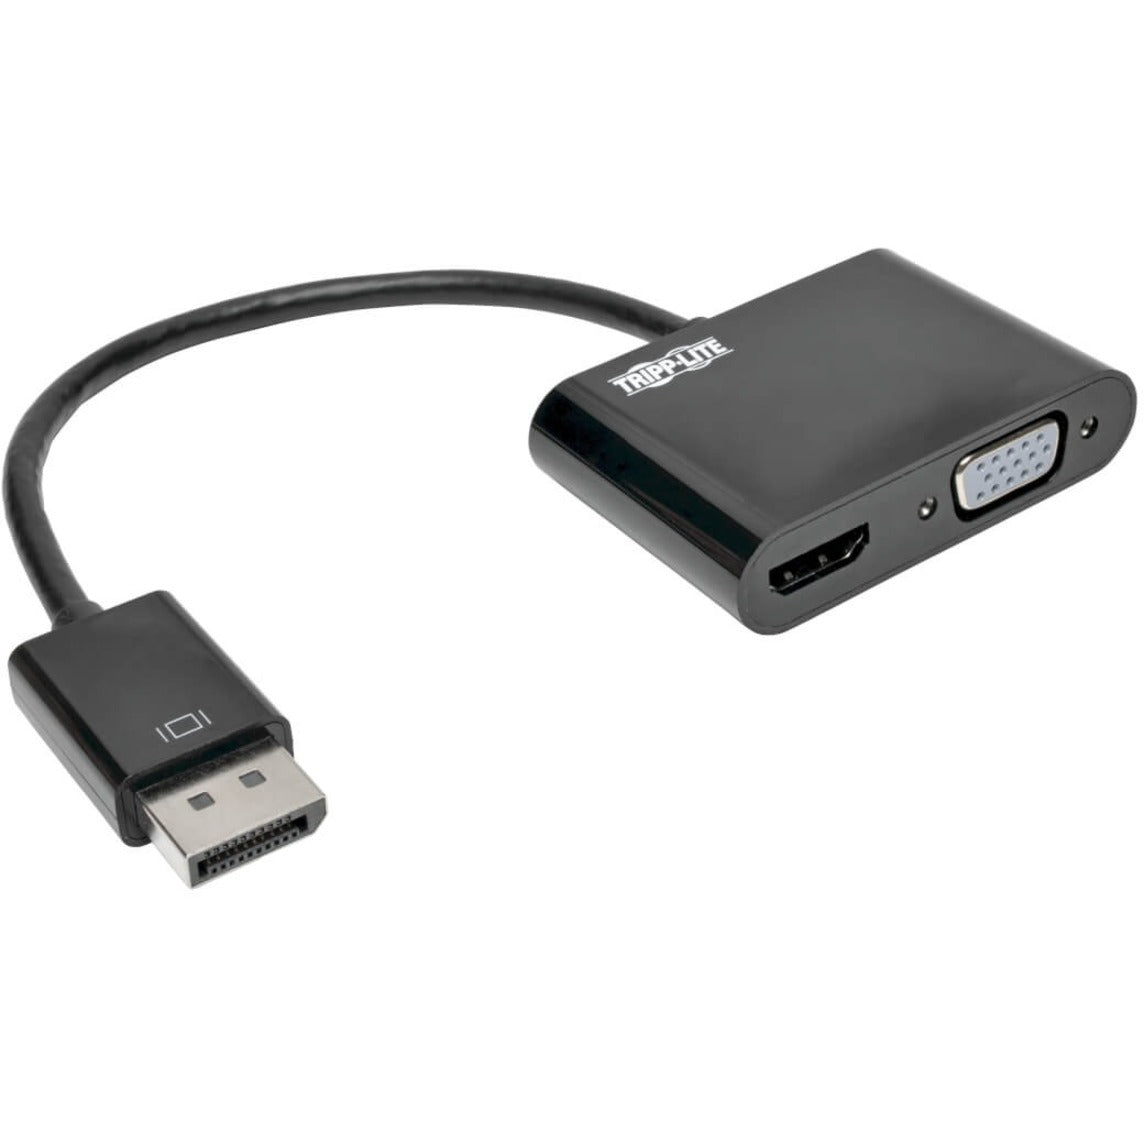 Tripp Lite P136-06N-HVV2BP DisplayPort/HDMI/VGA Adapter, Connect Your Devices with Ease